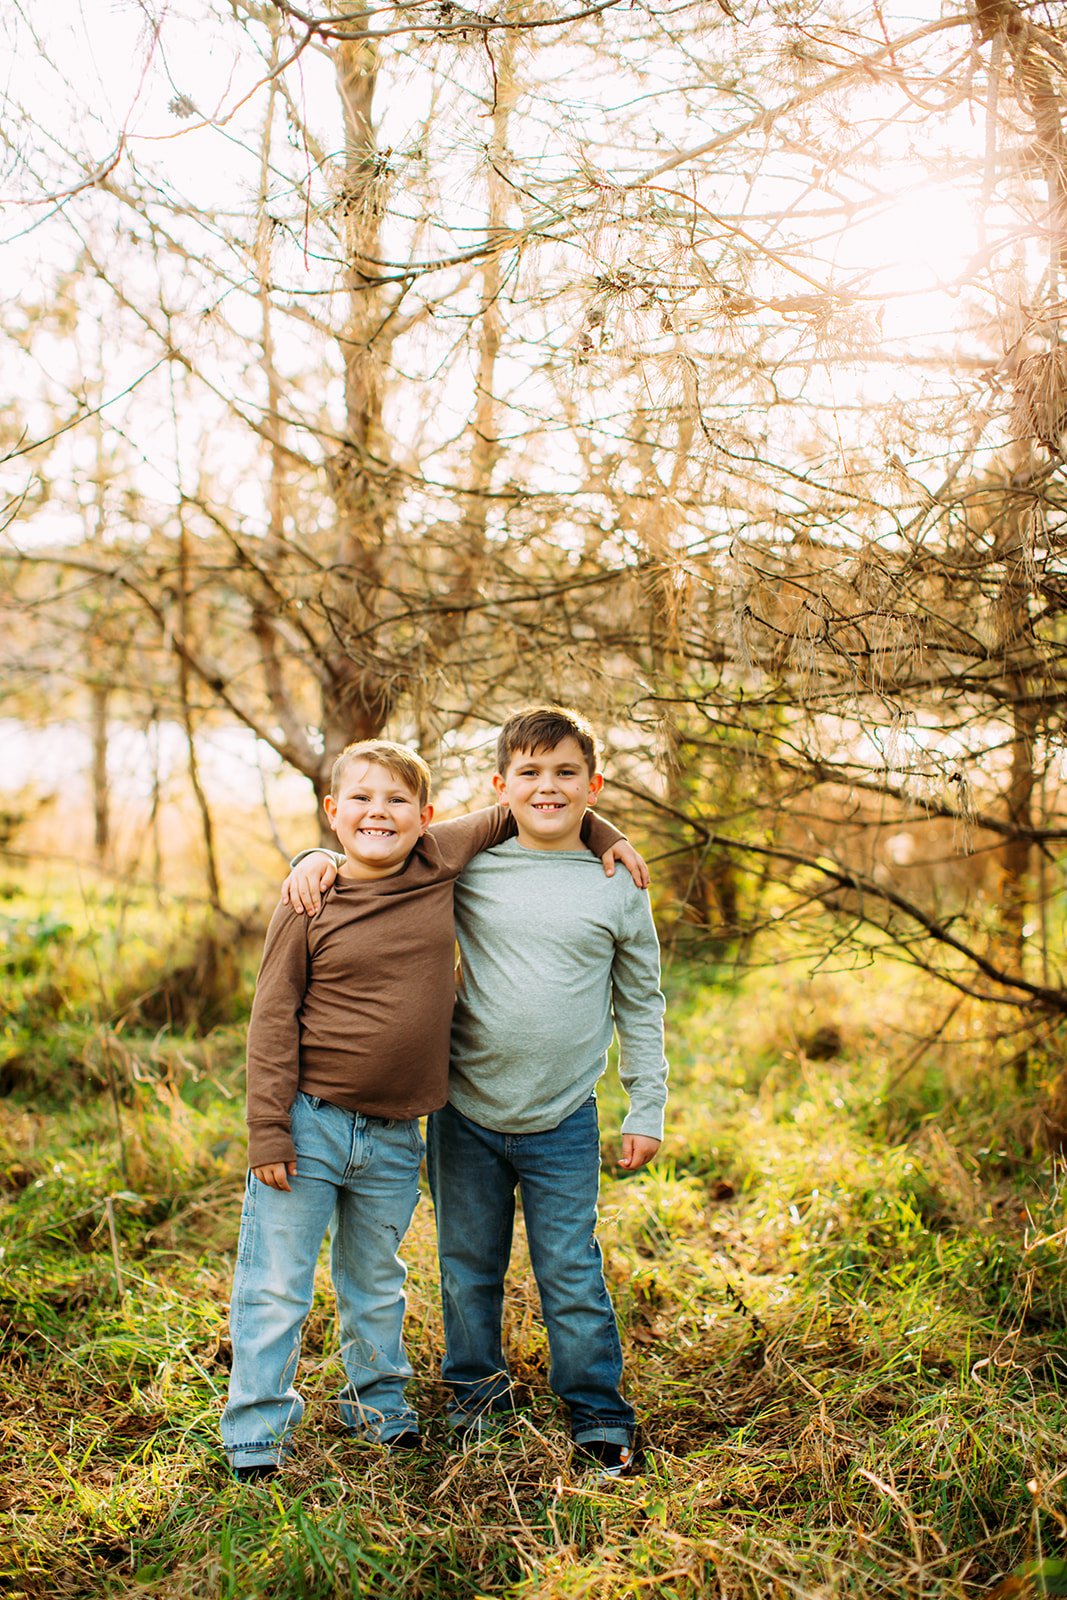  Teala Ward Photography captures two brothers smiling with their arms around each other's shoulders. brother pictures #TealaWardPhotography #TealaWardFamilies #holidayfamilypics #photography #Illinoisfamilyphotography #familysession 